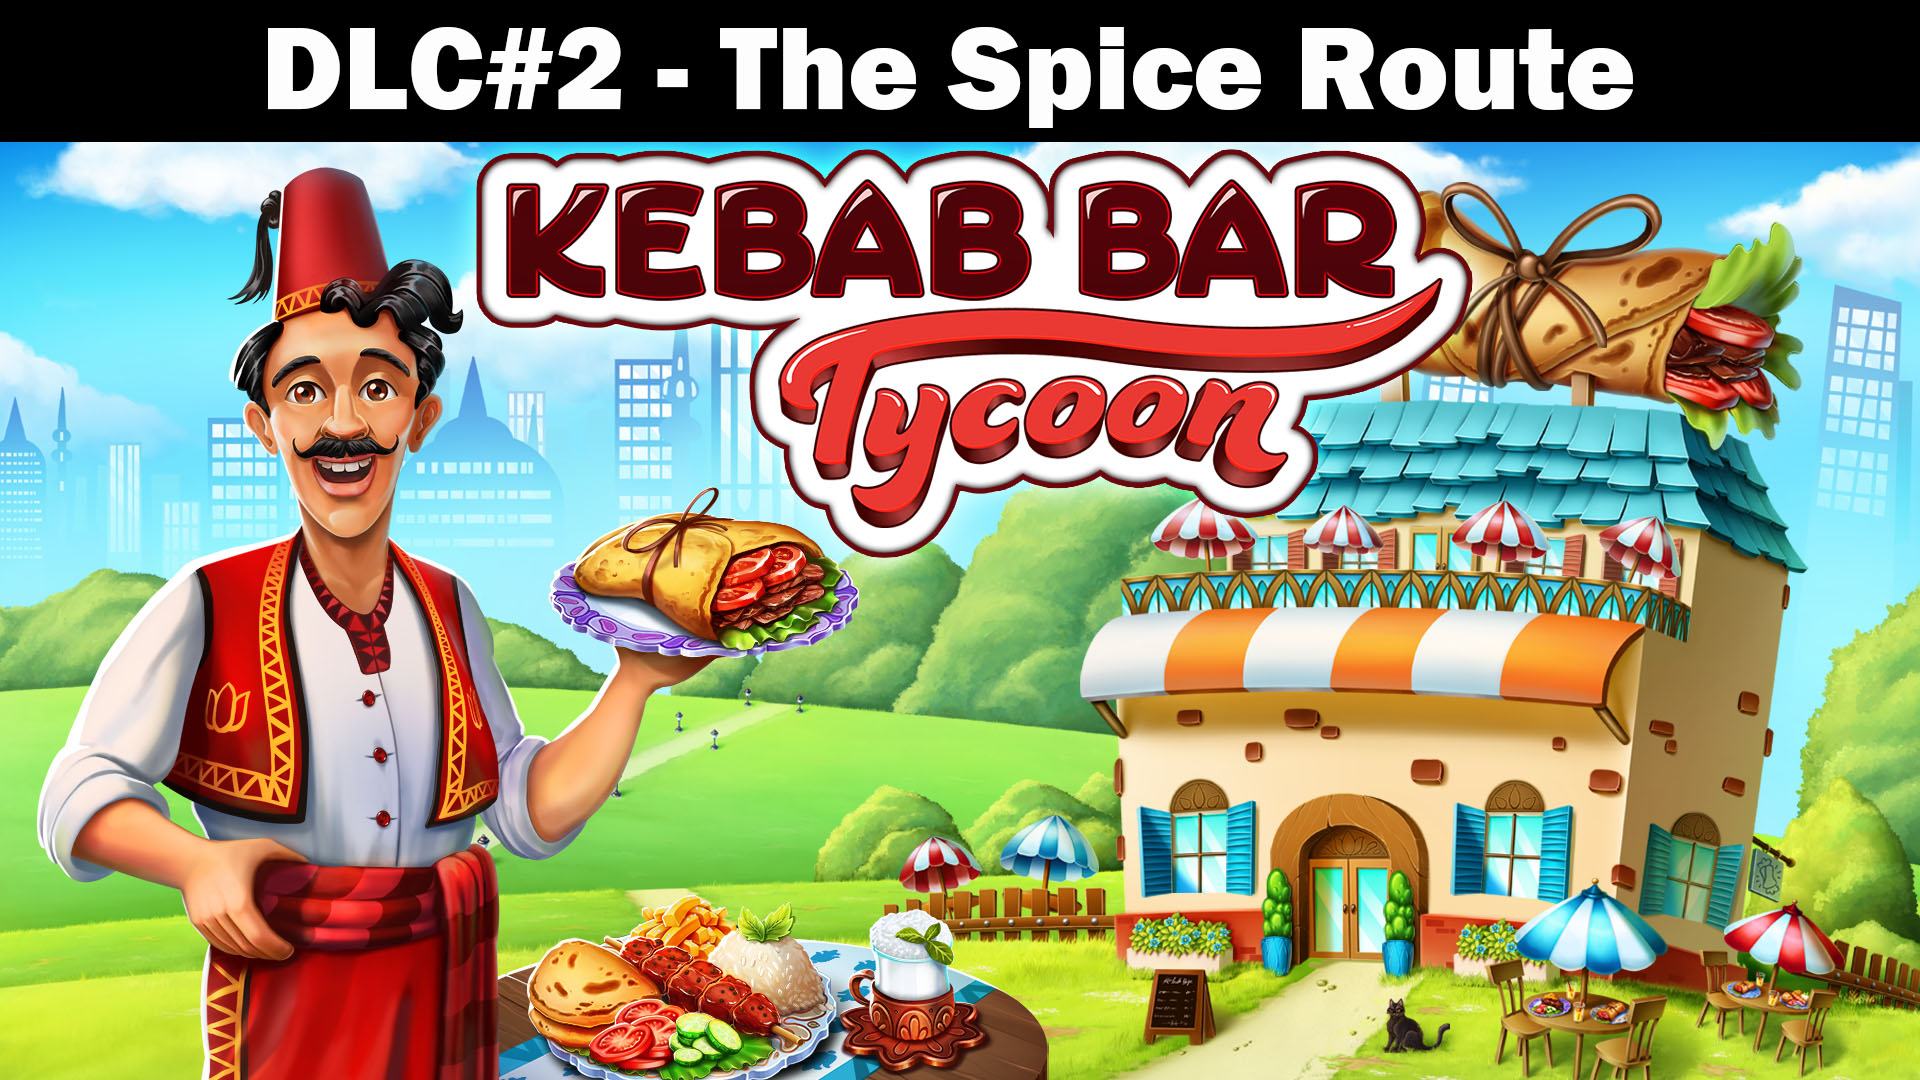 Kebab Bar Tycoon - DLC#2 - The Spice Route